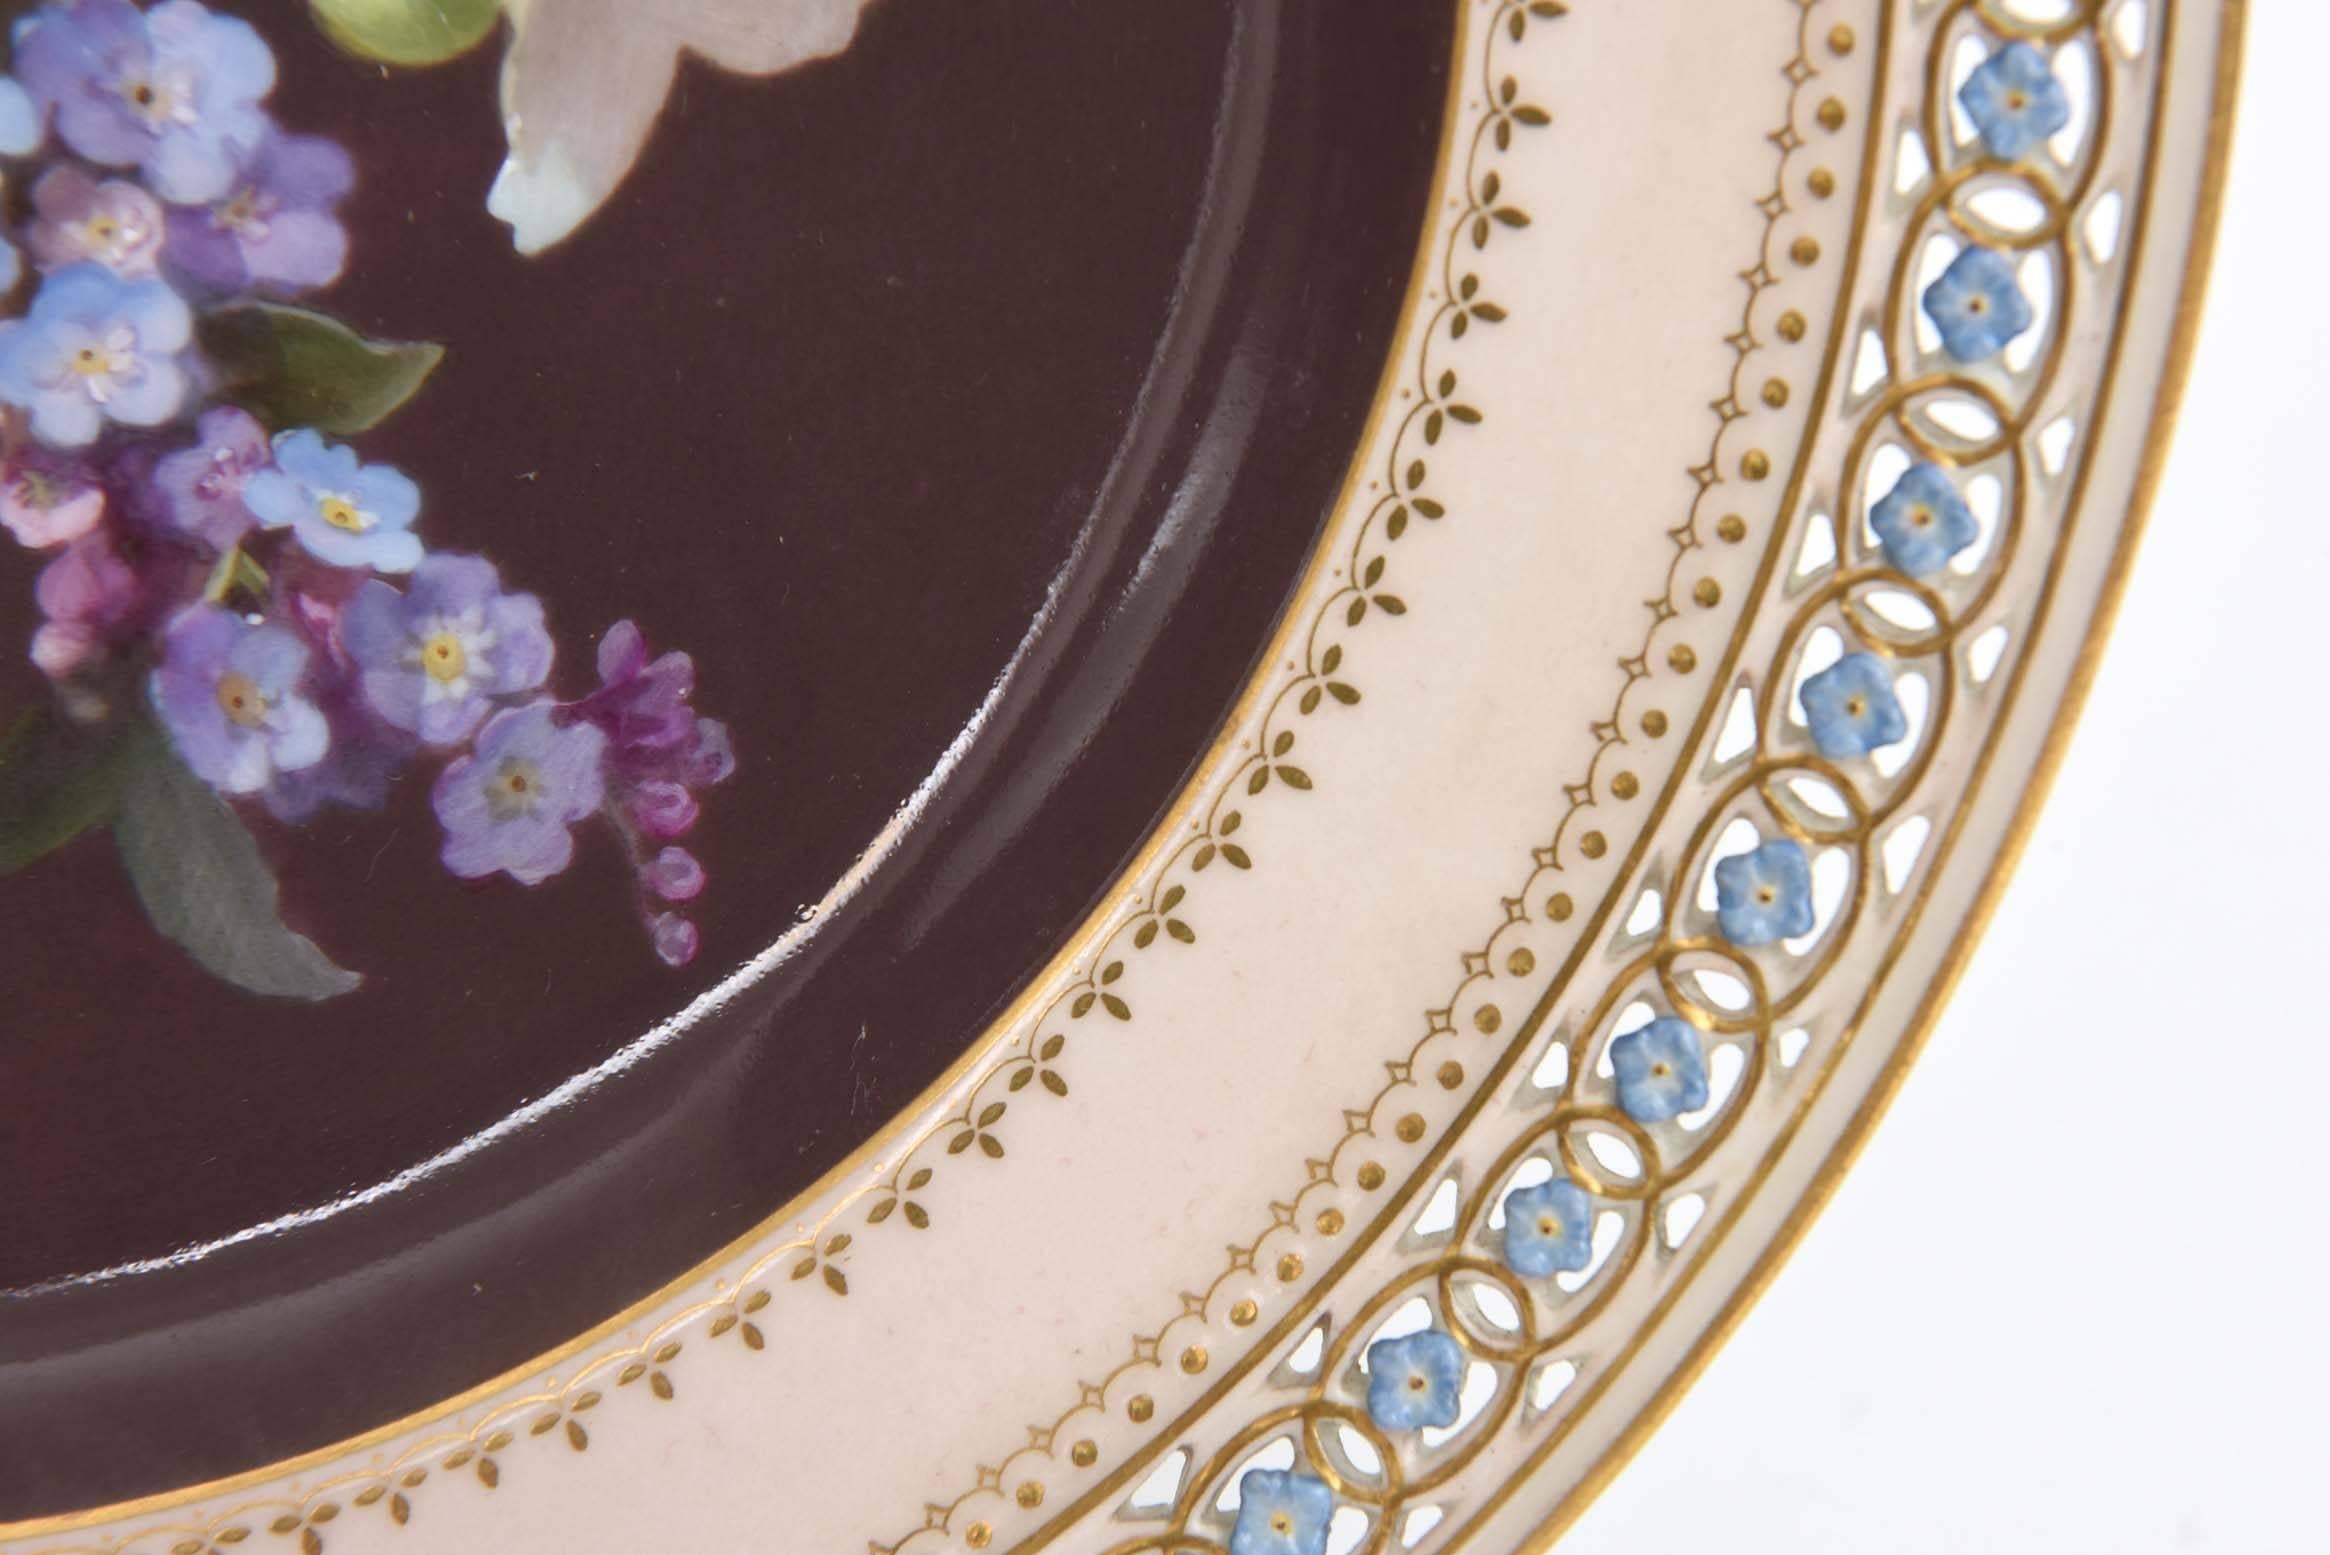 19th Century Rare Meissen Fine Porcelain Cabinet Pieces. Hand-Painted Botanicals, Reticulated